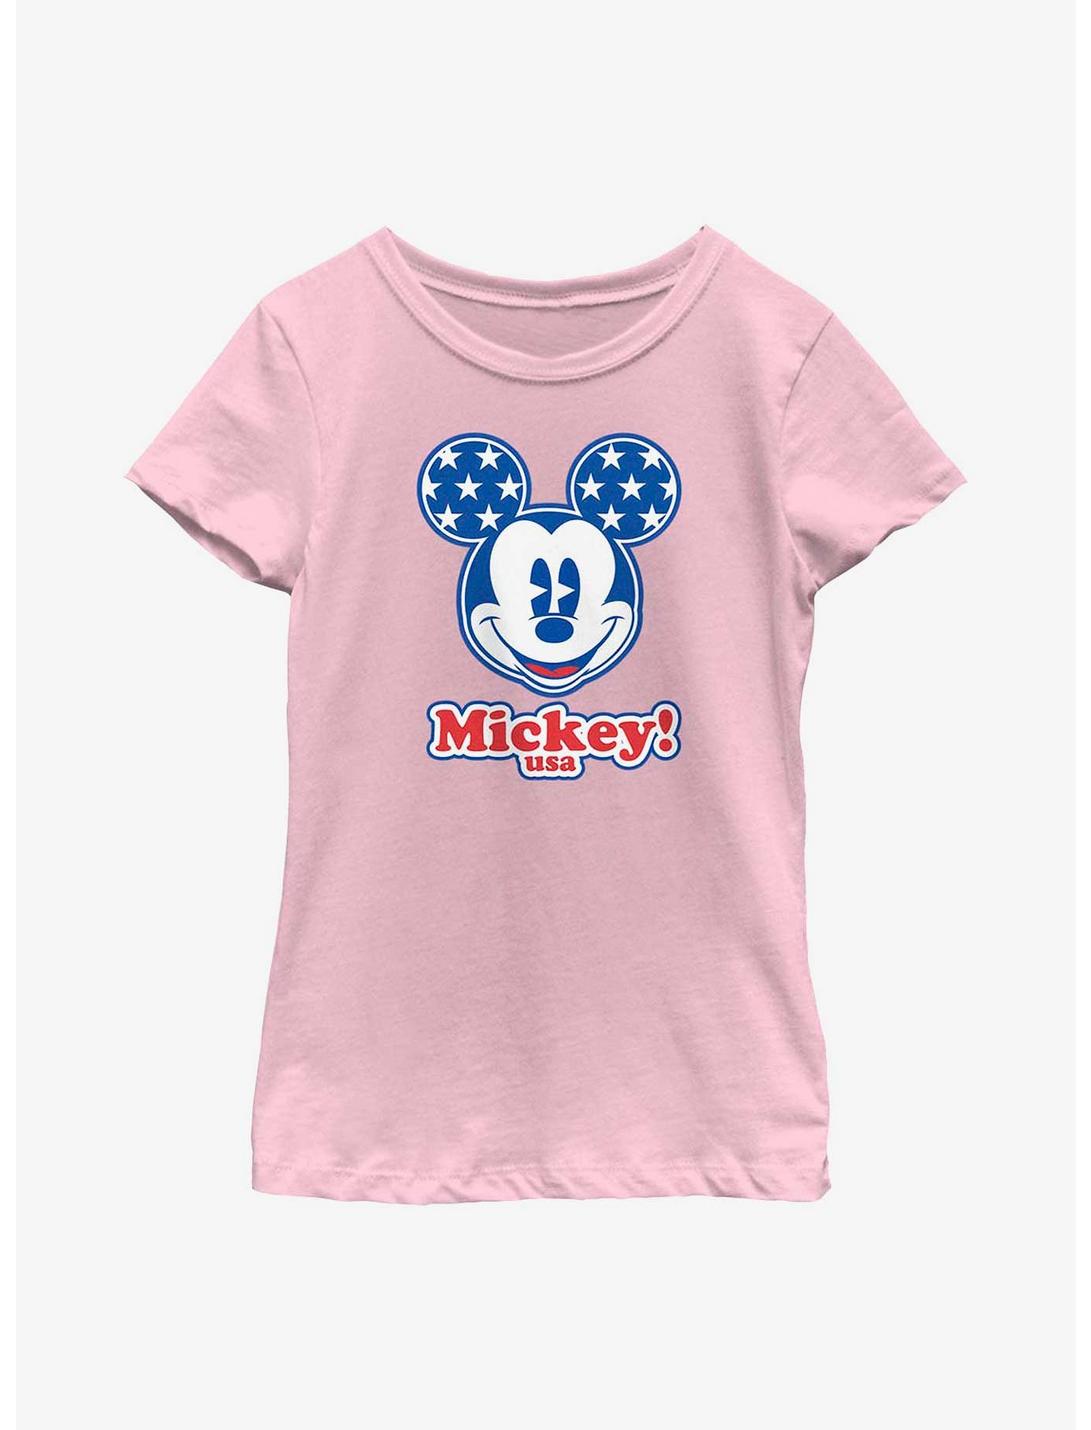 Disney Mickey Mouse USA Youth Girls T-Shirt, PINK, hi-res